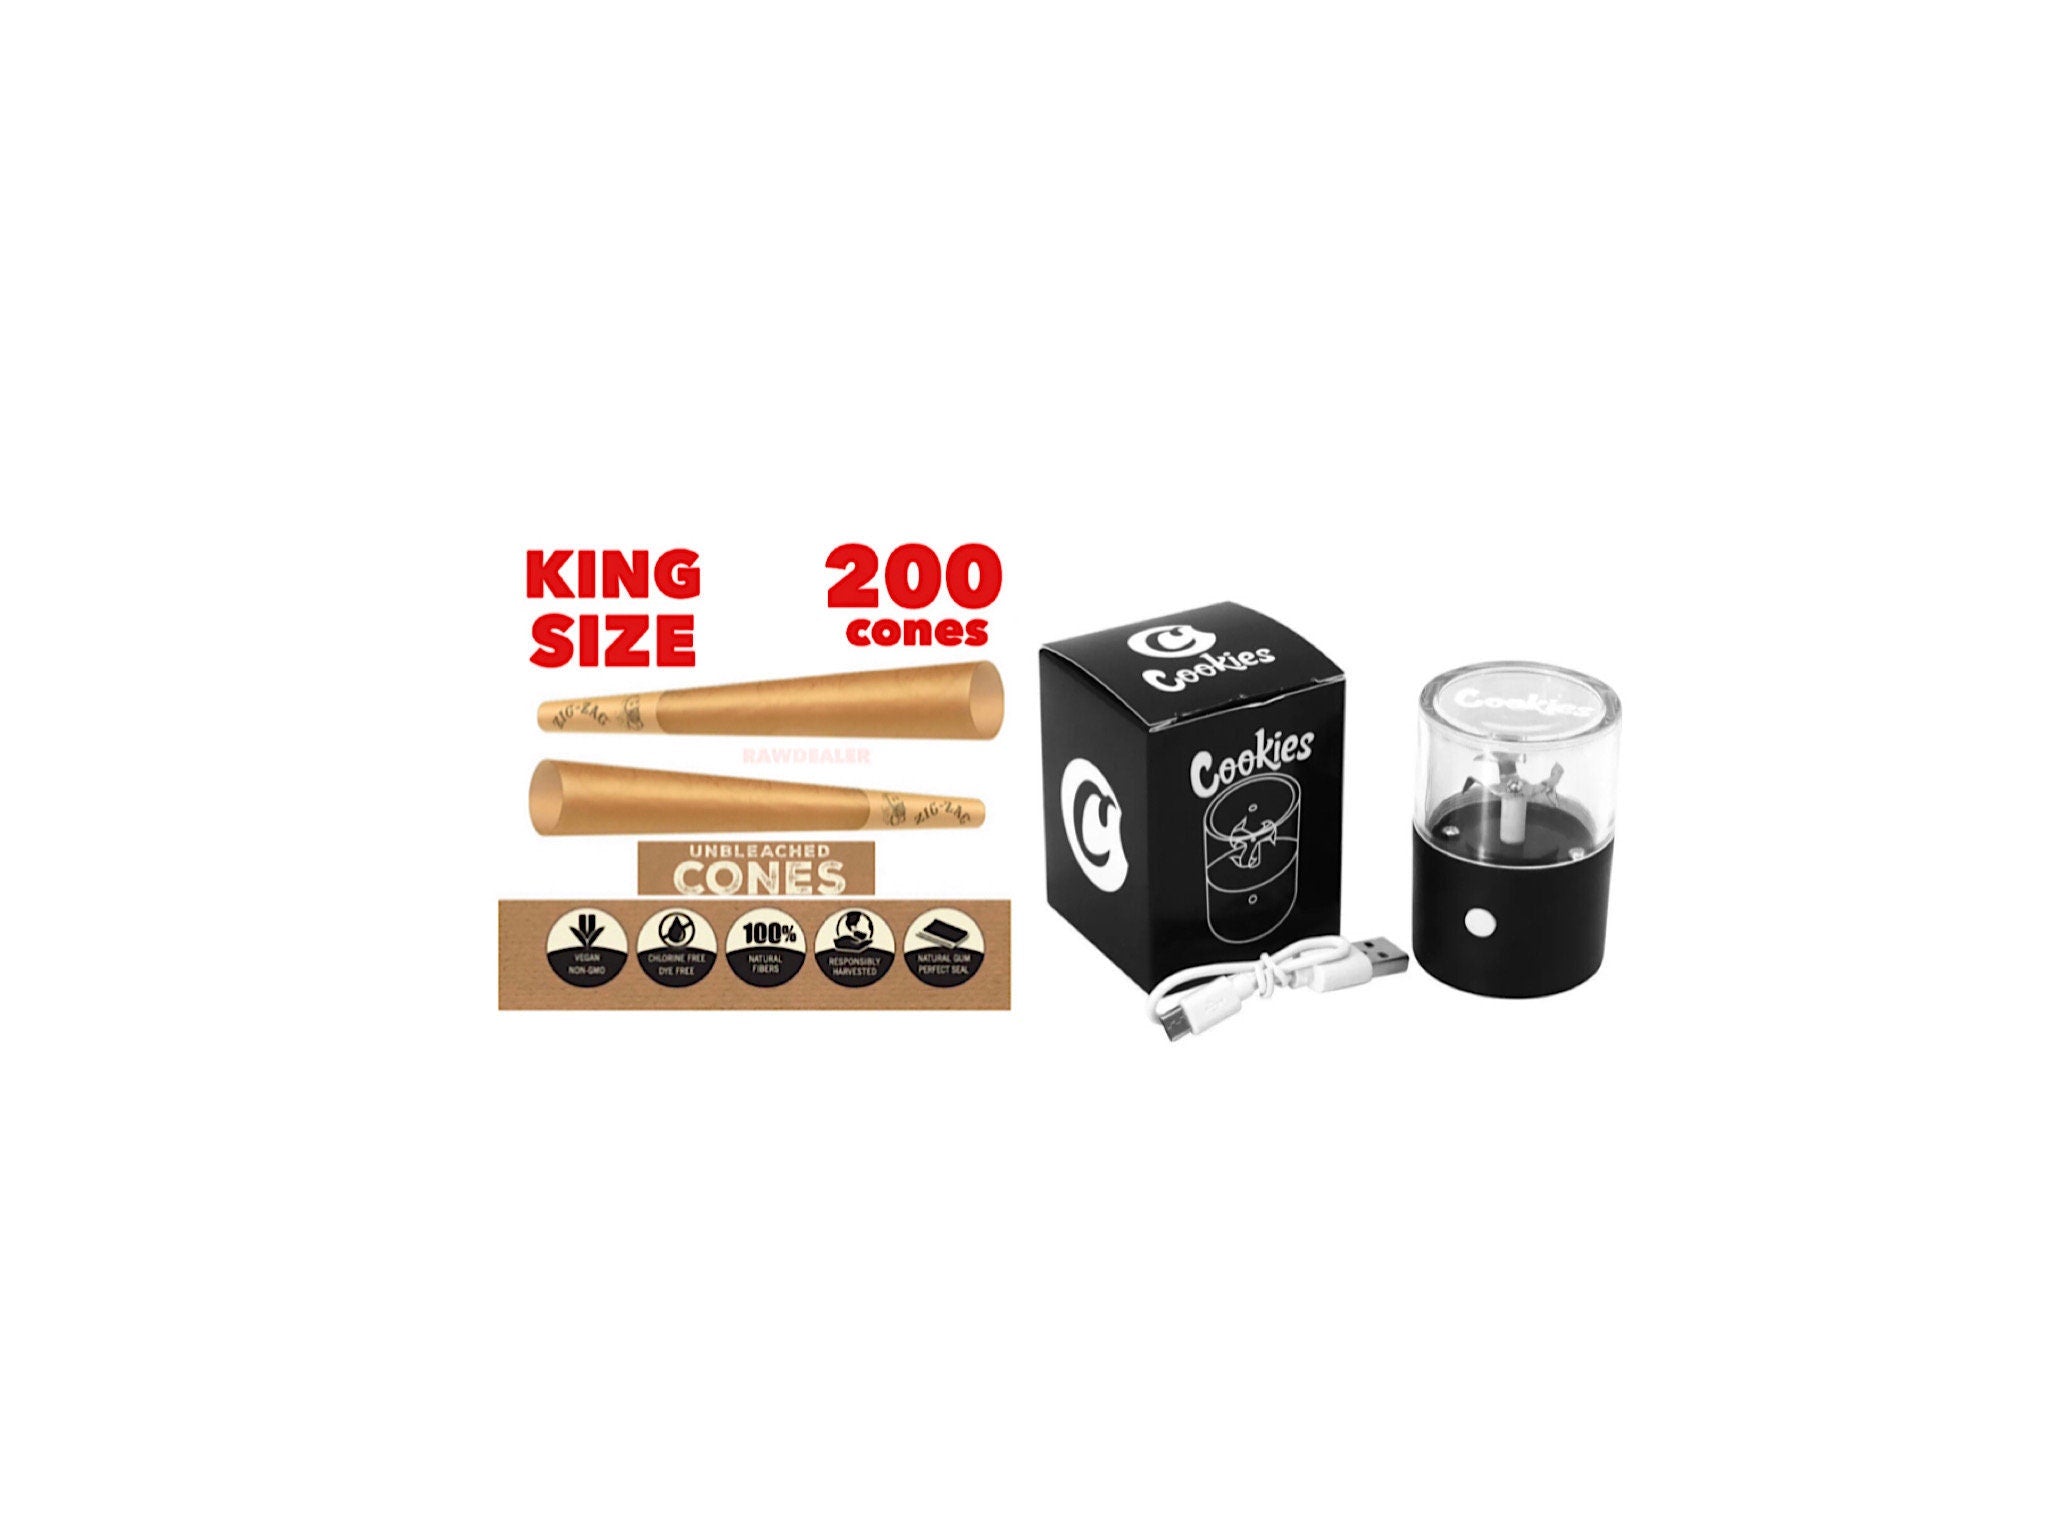 Zig zag unbleached KING size pre rolled cone 100PK 200PK cones + elect –  WISE FUME